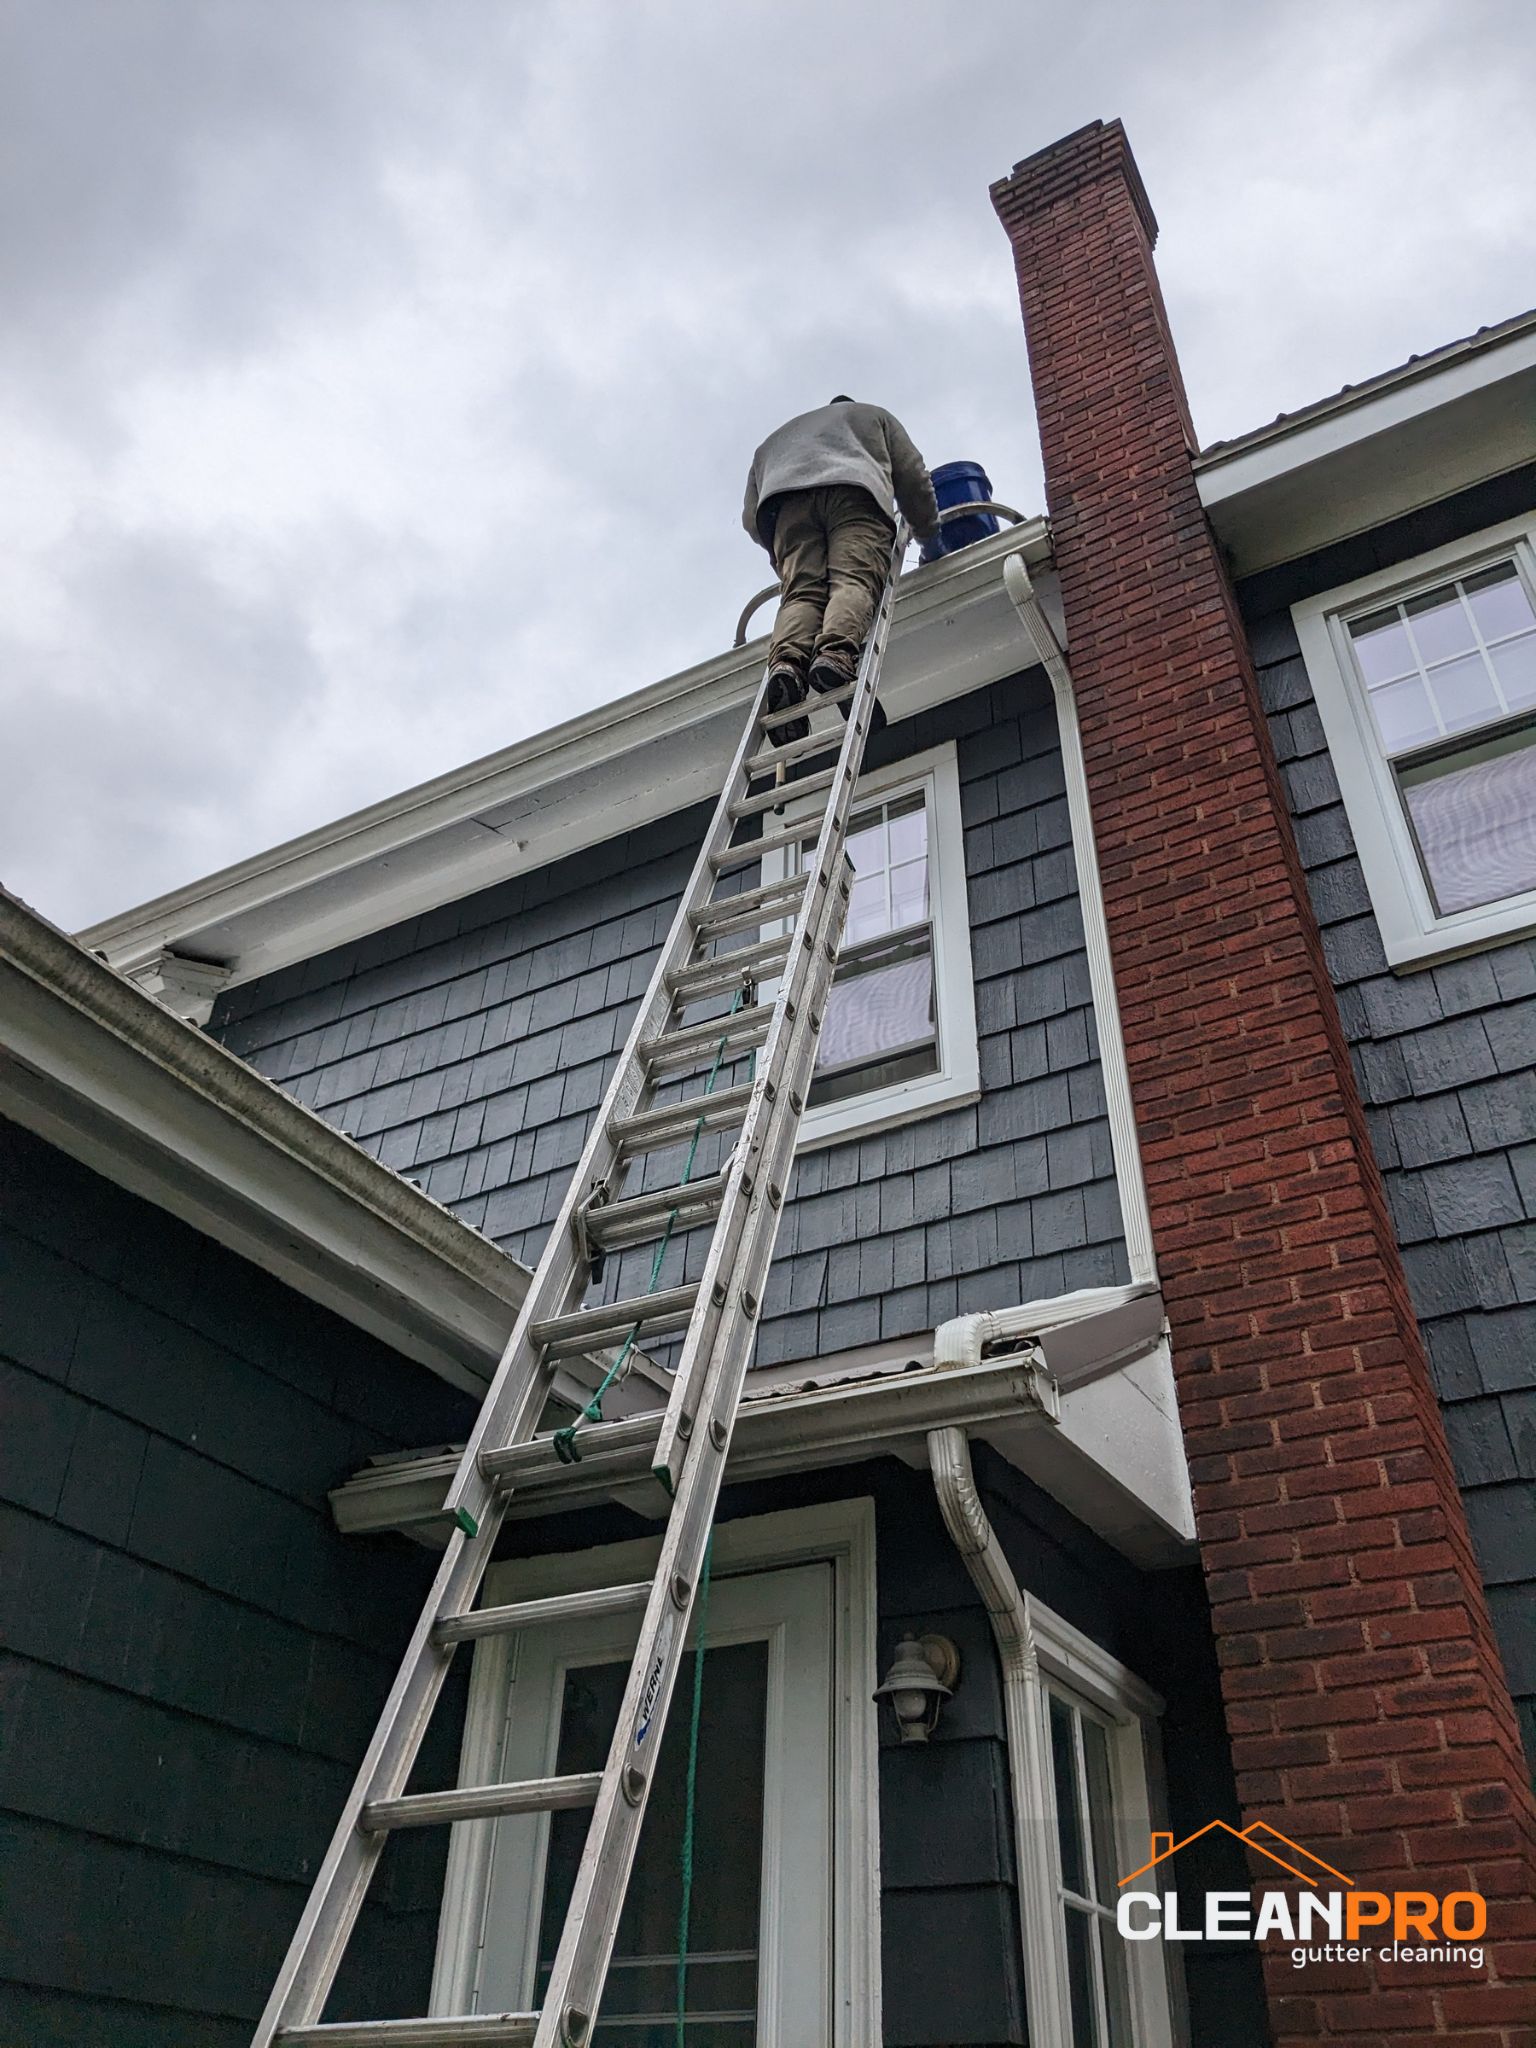 Top Notch Gutter Cleaning Service in Naperville